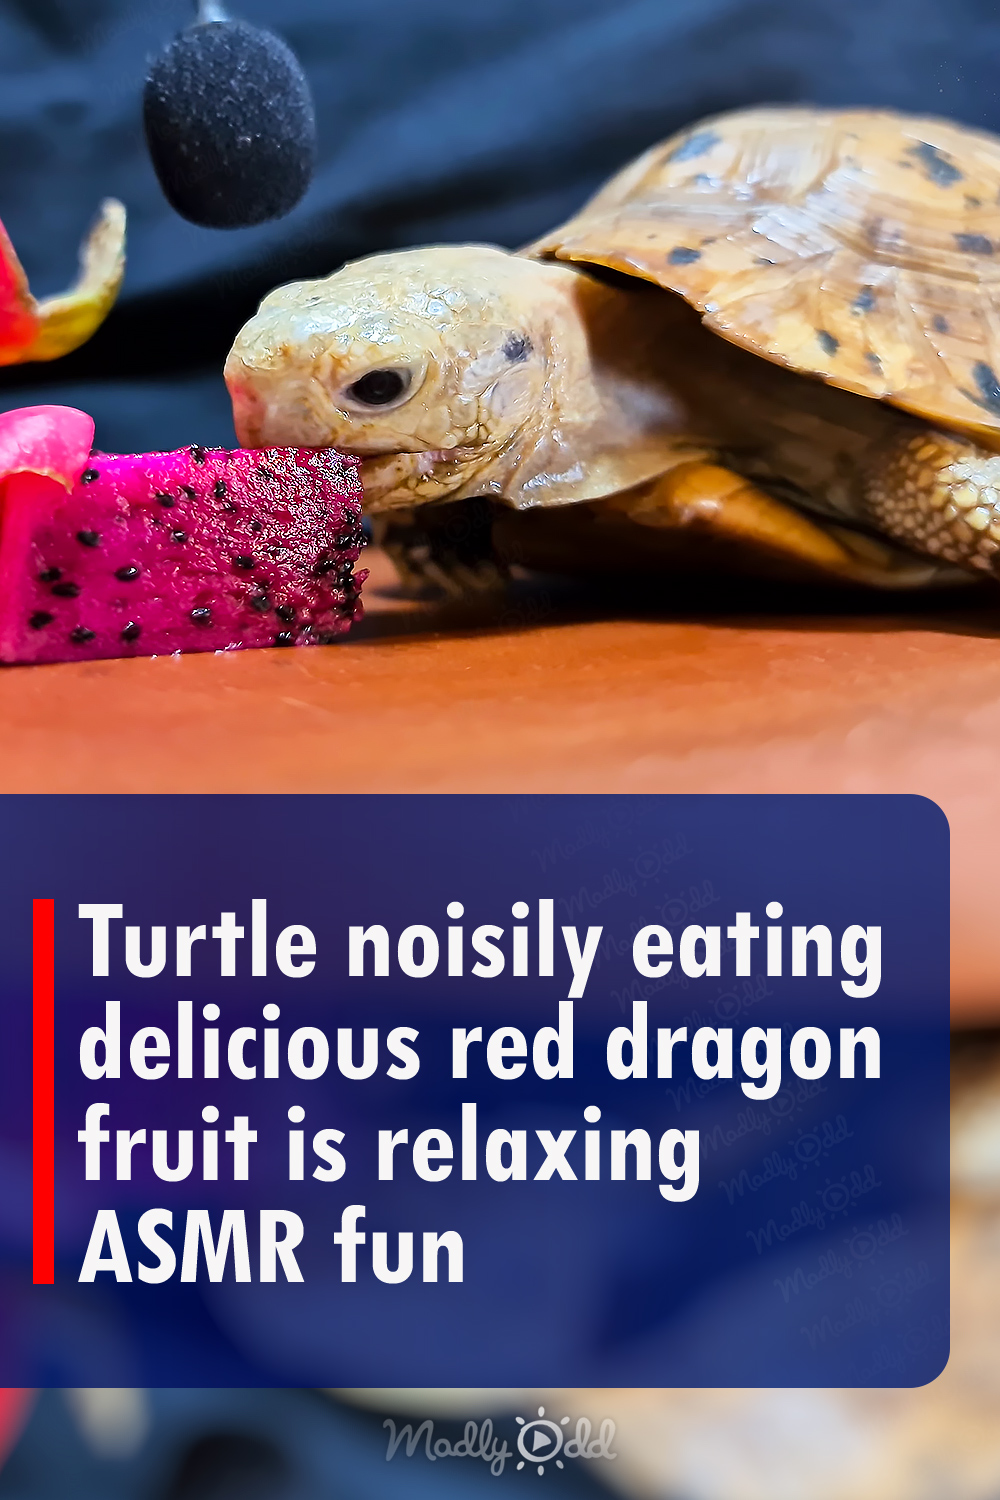 Turtle noisily eating delicious red dragon fruit is relaxing ASMR fun